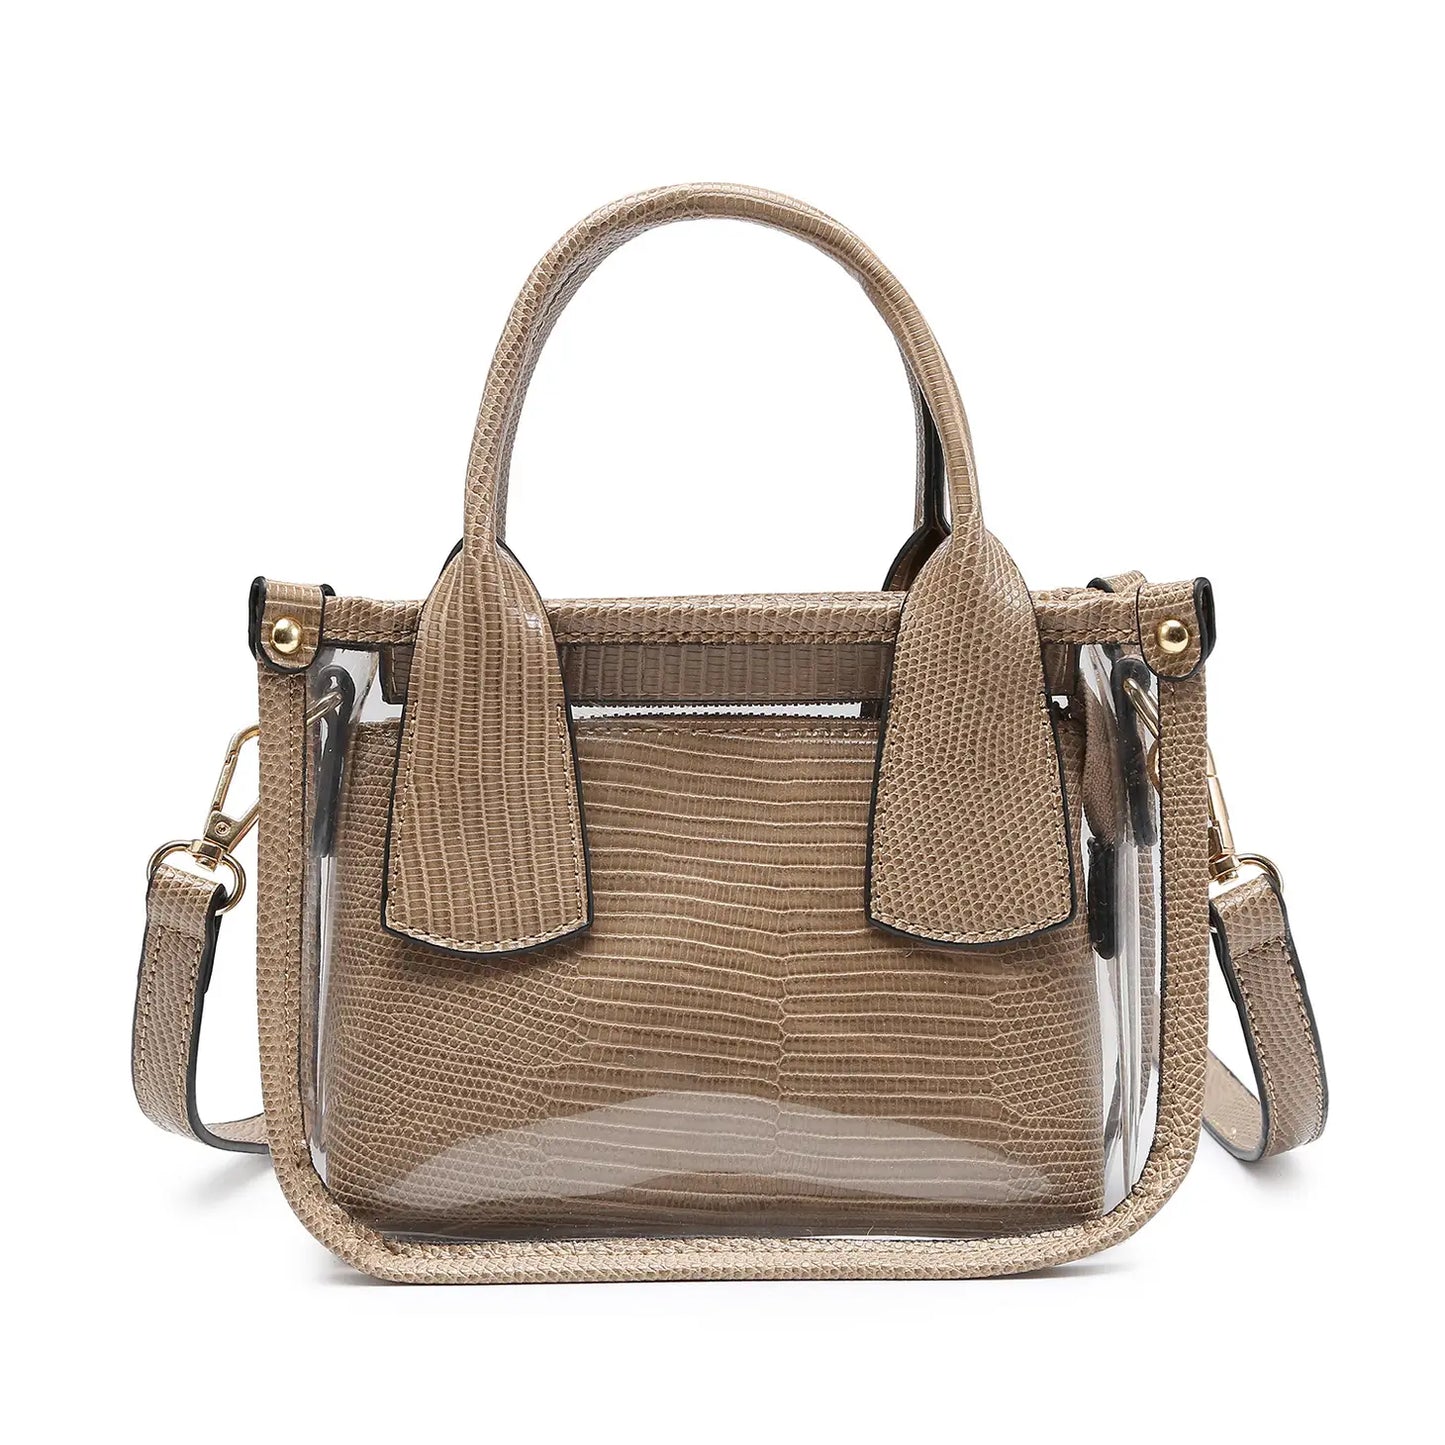 Stacey Clear Handbag - Taupe